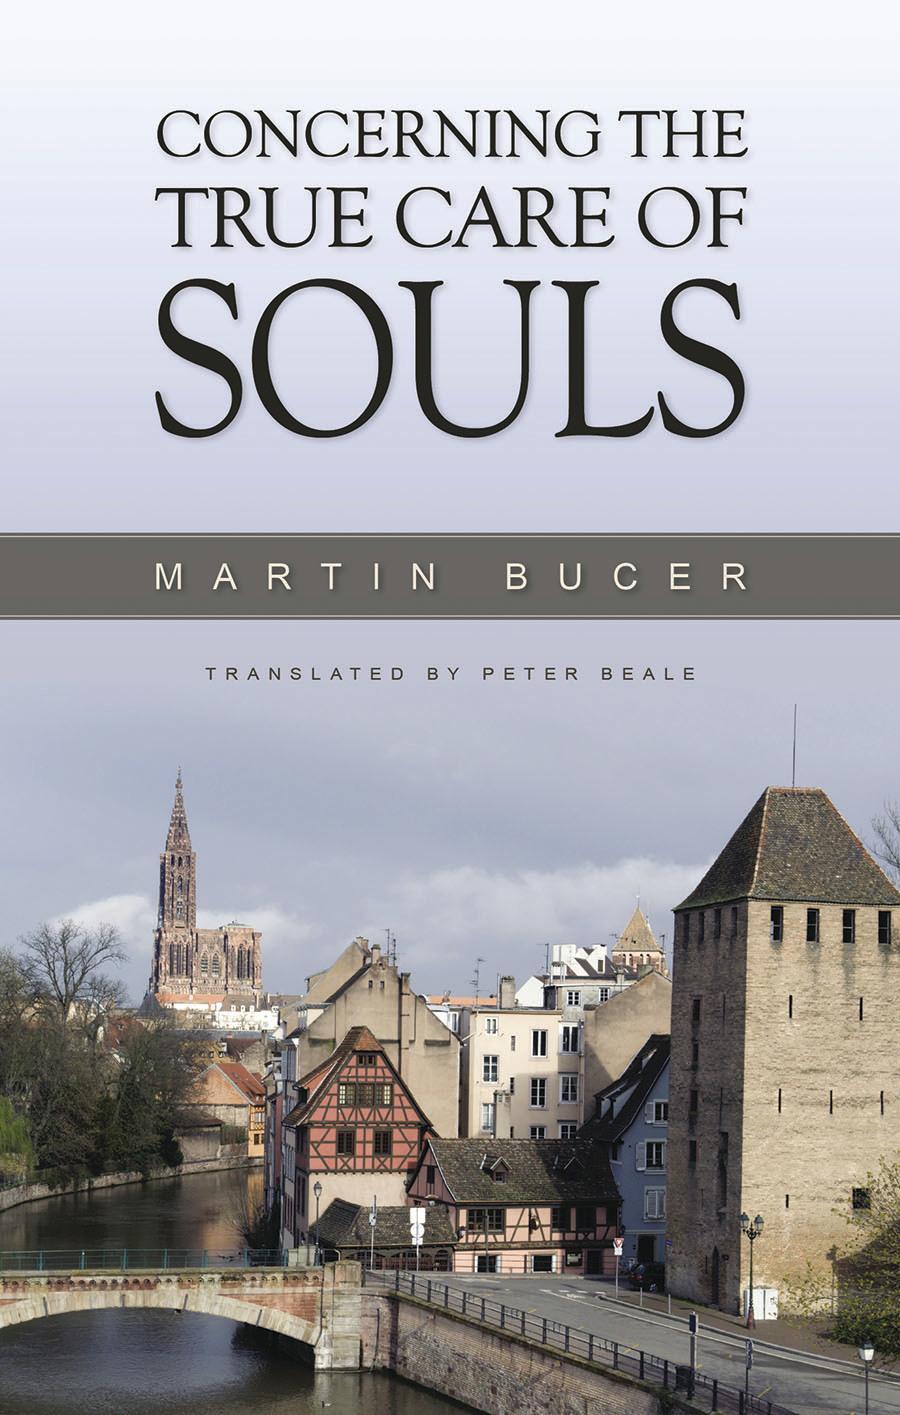 Book Cover For 'Concerning the True Care of Souls'